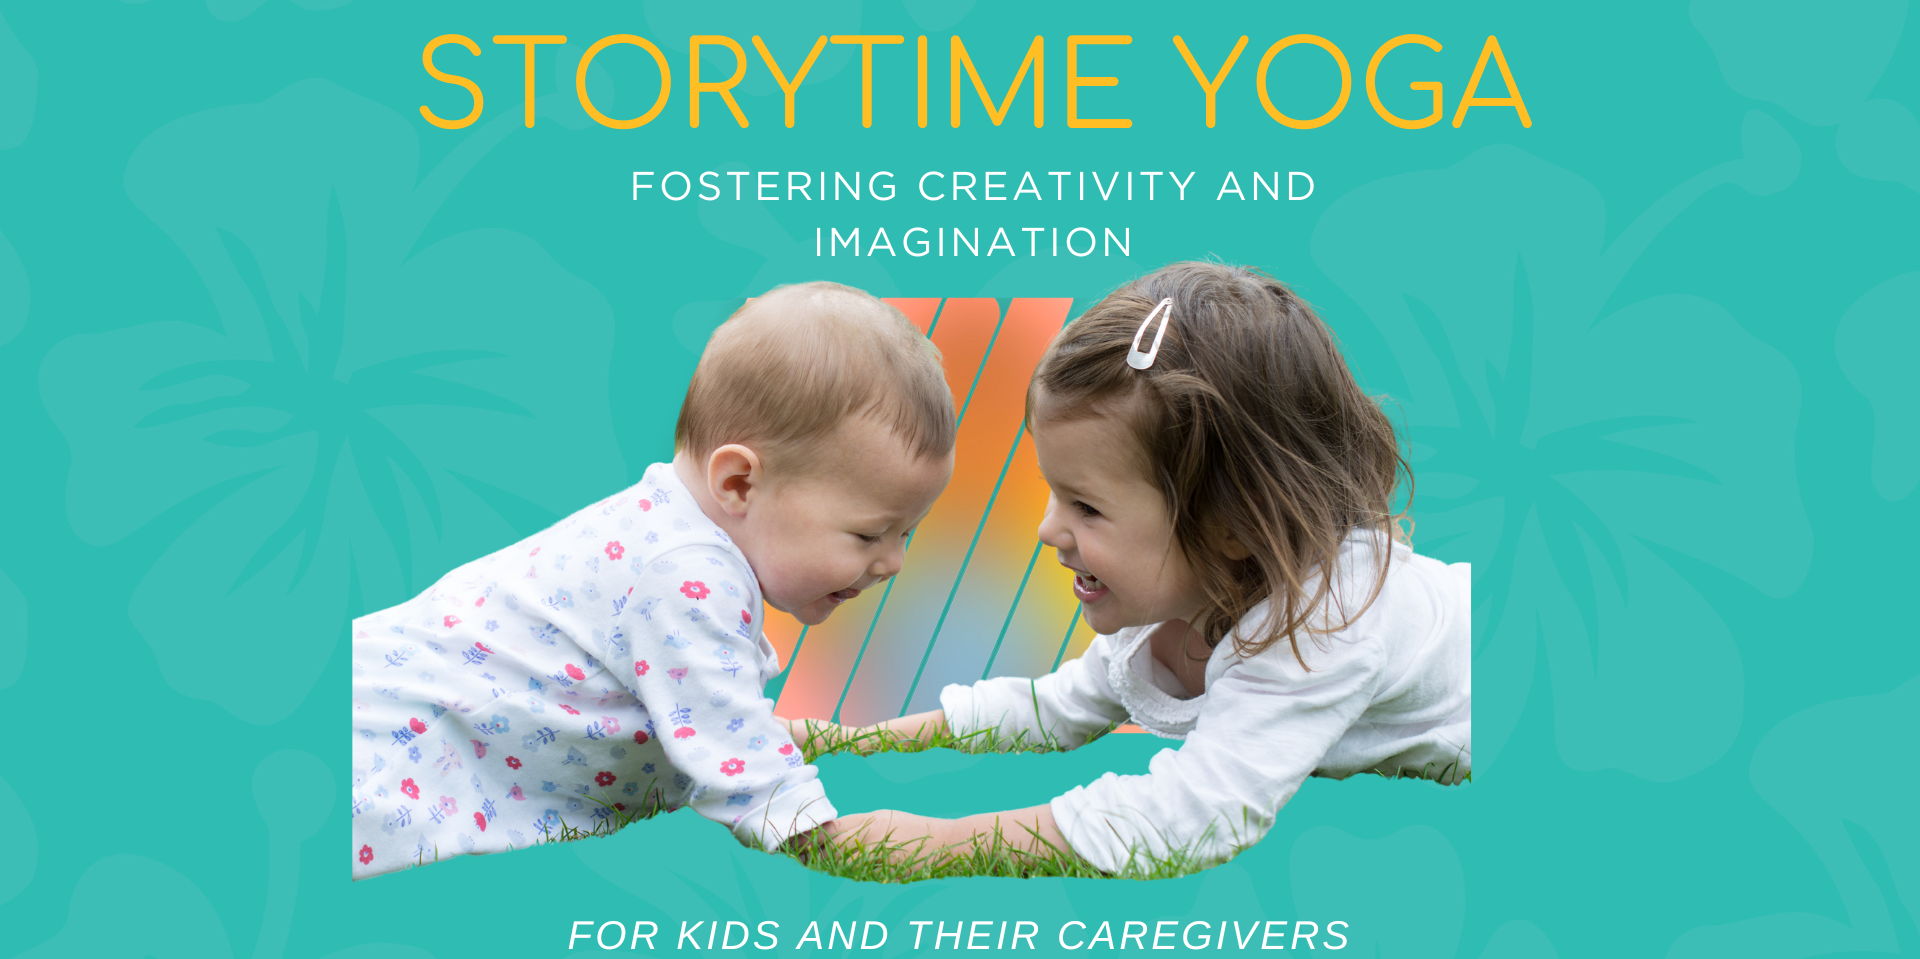 Storytime Yoga: Fostering Creativity and Imagination for Kids (Ages 6mo to 6 years) and Caregivers promotional image